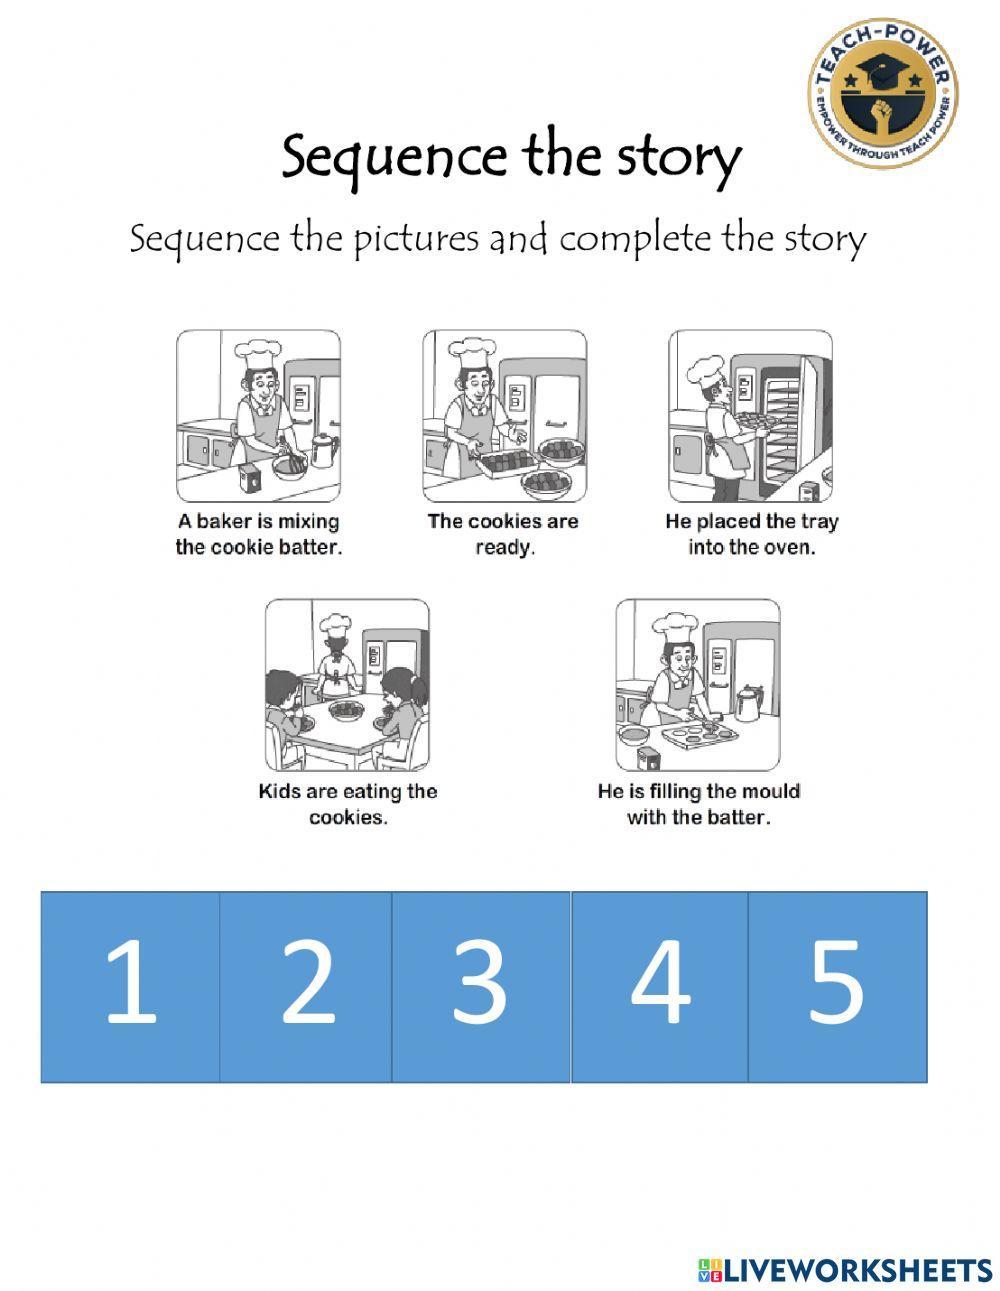 Sequence the story